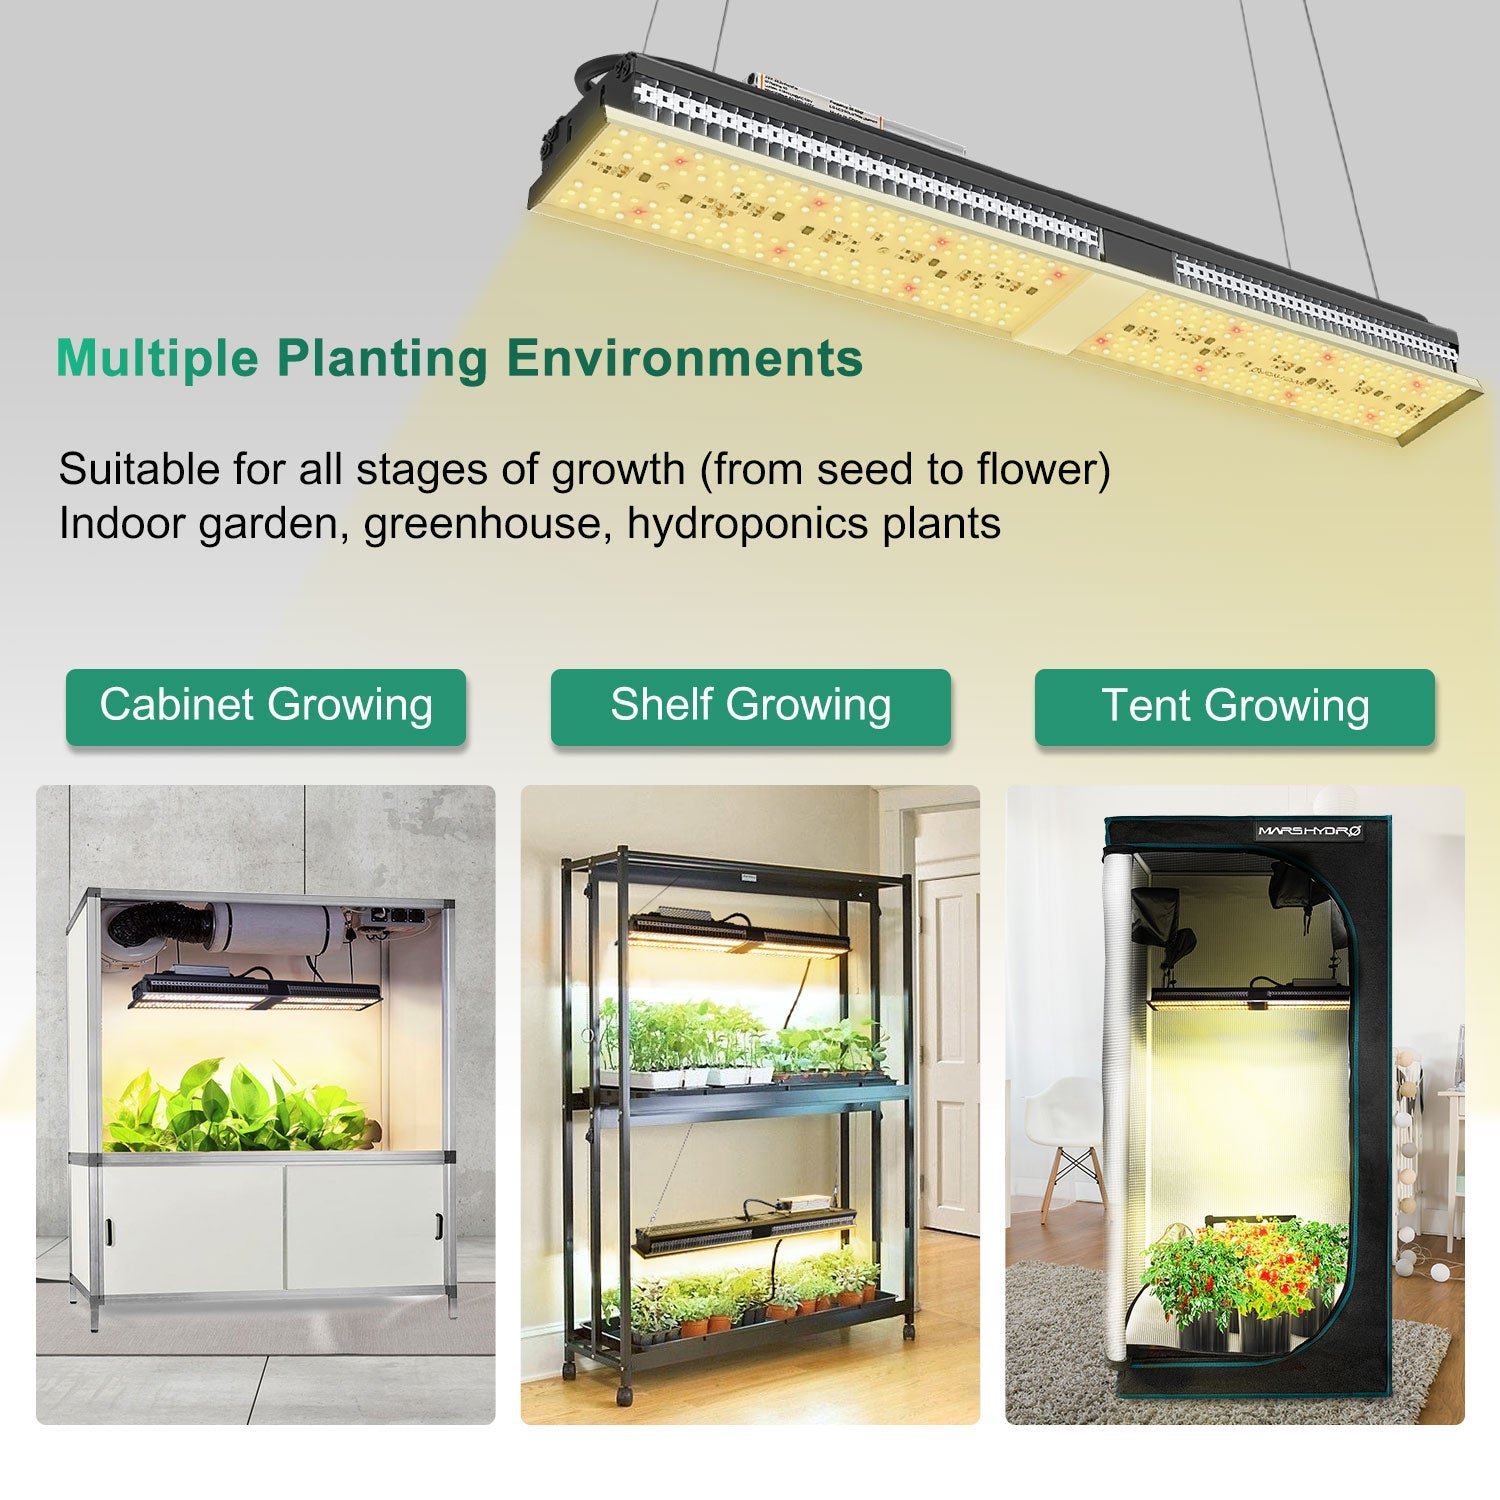 [90% new] Used - SP 150 Led Grow Light 140W Full Spectrum Strip Hydroponics Panel Indoor Plants High Yield